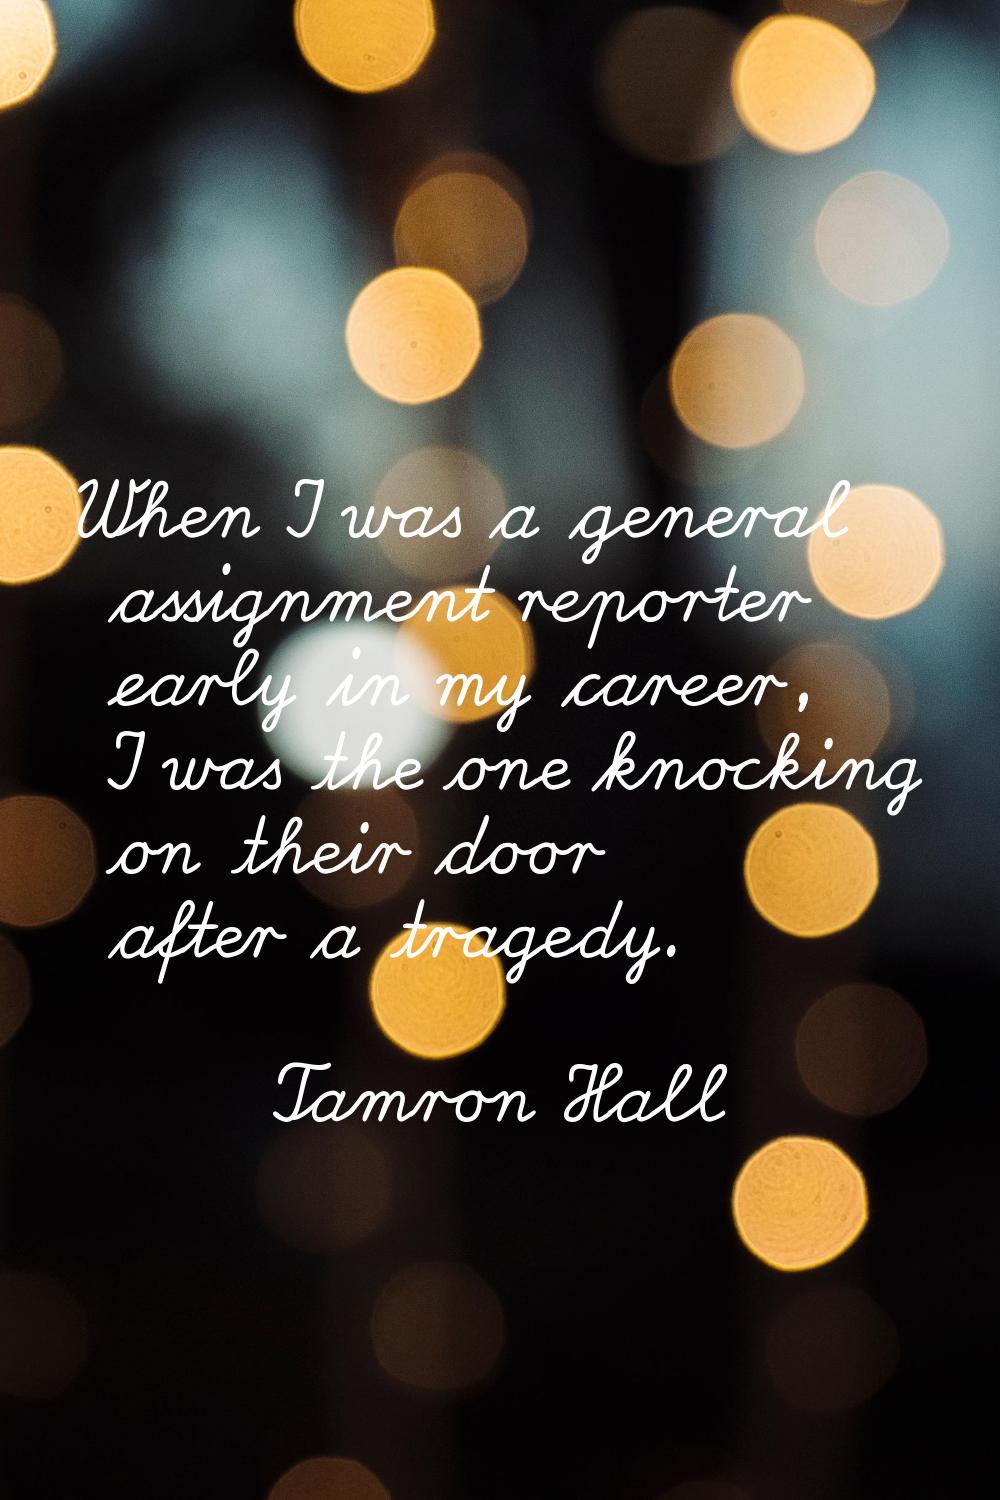 When I was a general assignment reporter early in my career, I was the one knocking on their door a